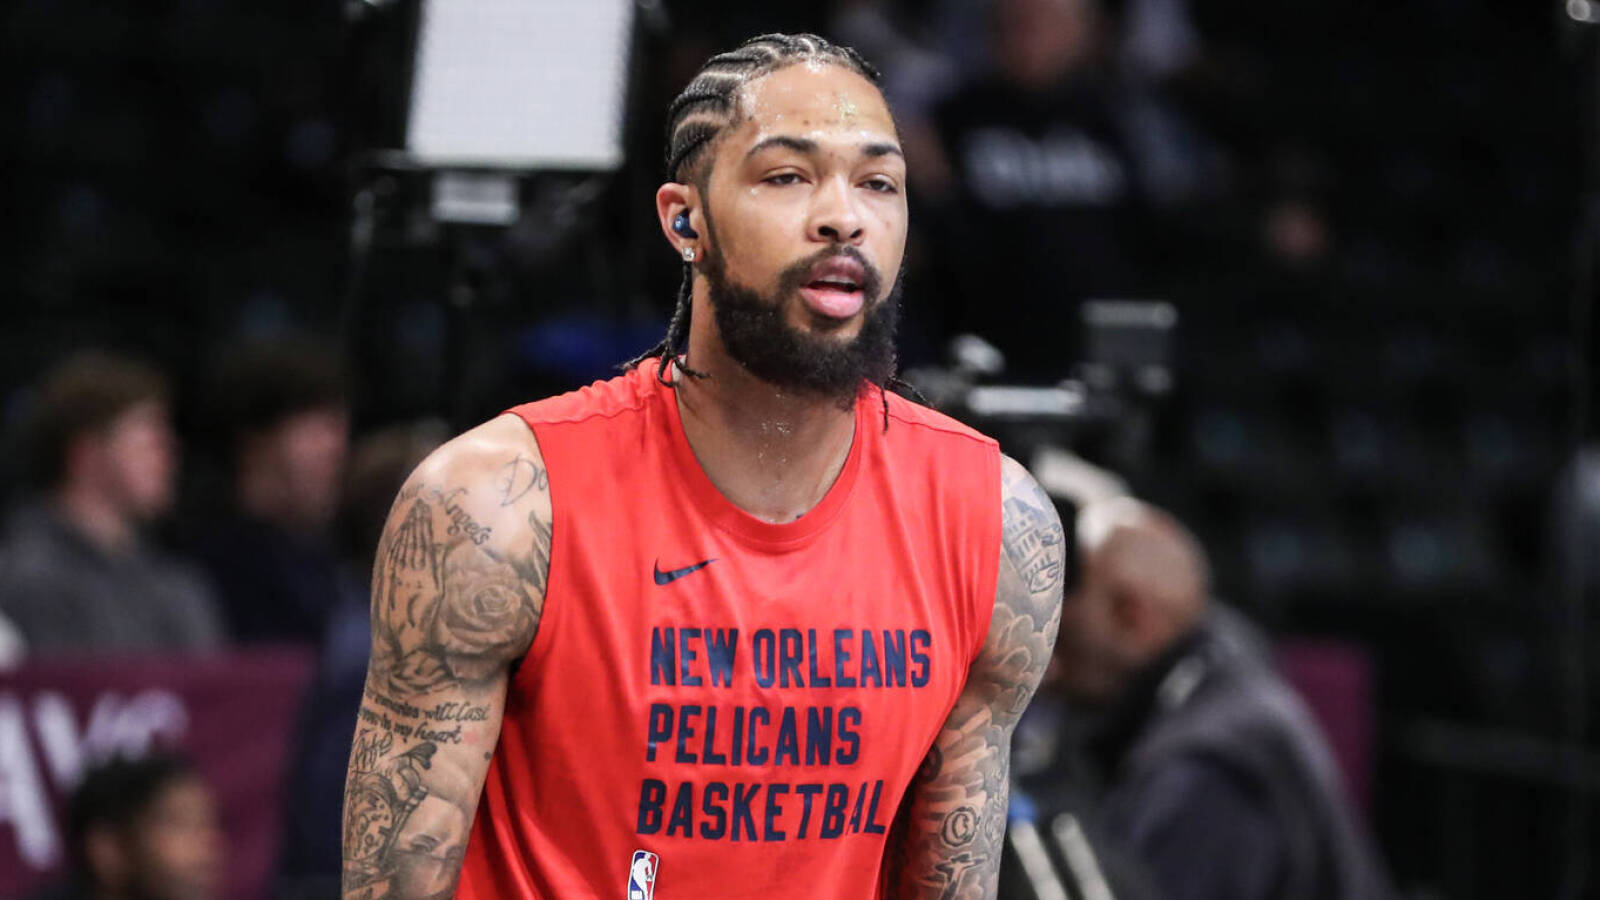 Pelicans forward expected to be traded this summer